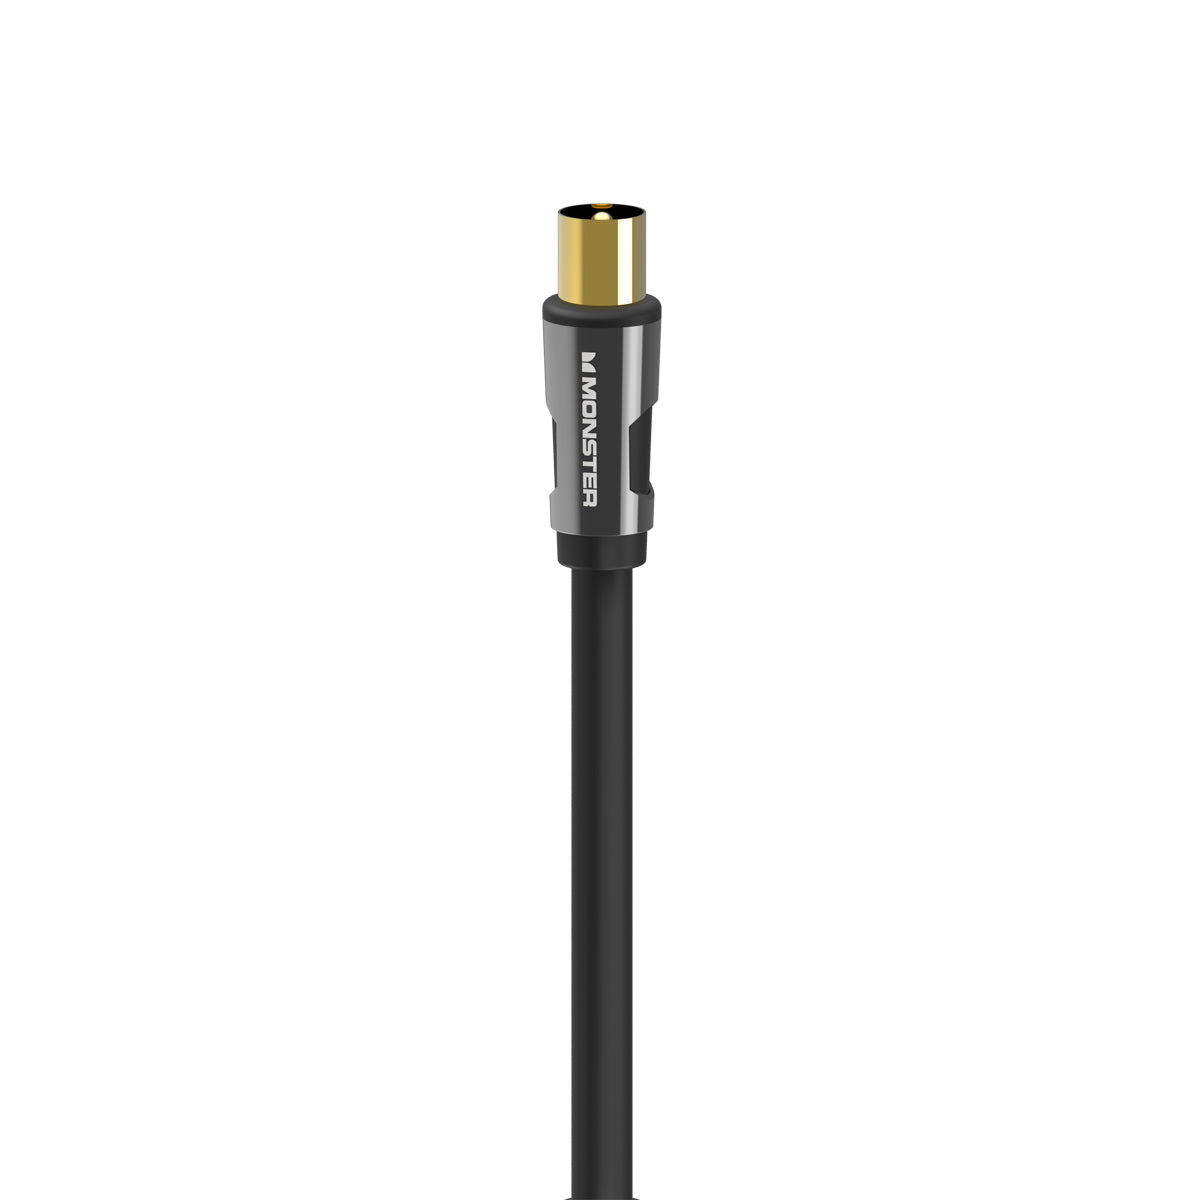 MONSTER ESSENTIALS RG6 PAL Cable